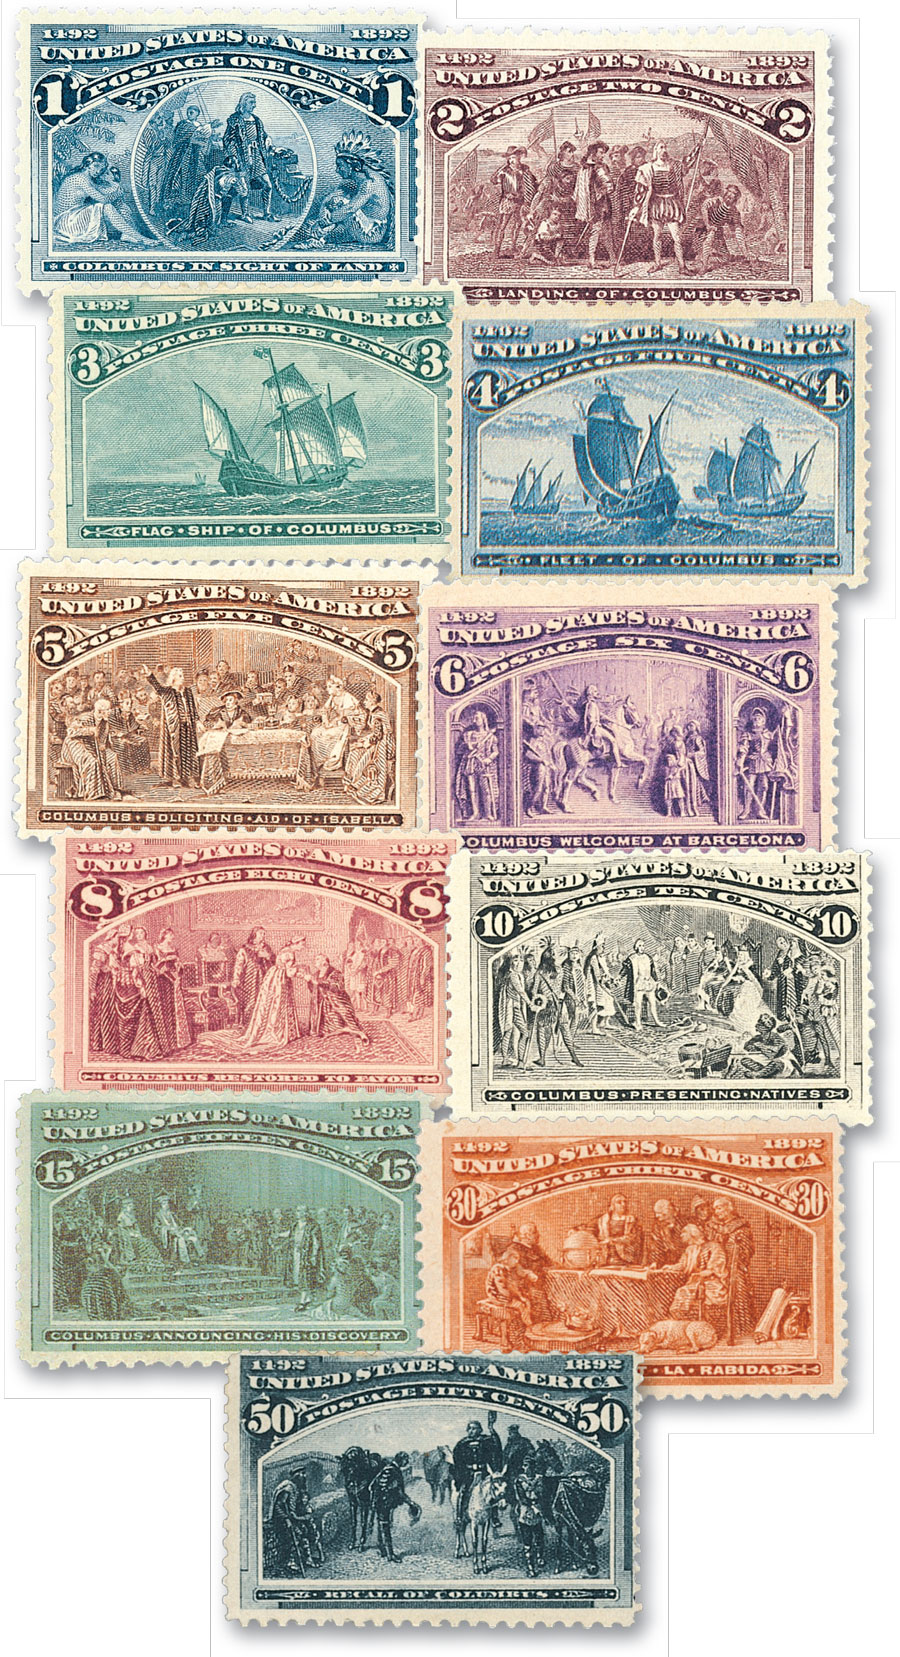 U.S. #230-40 – The first 11 Columbian stamps.